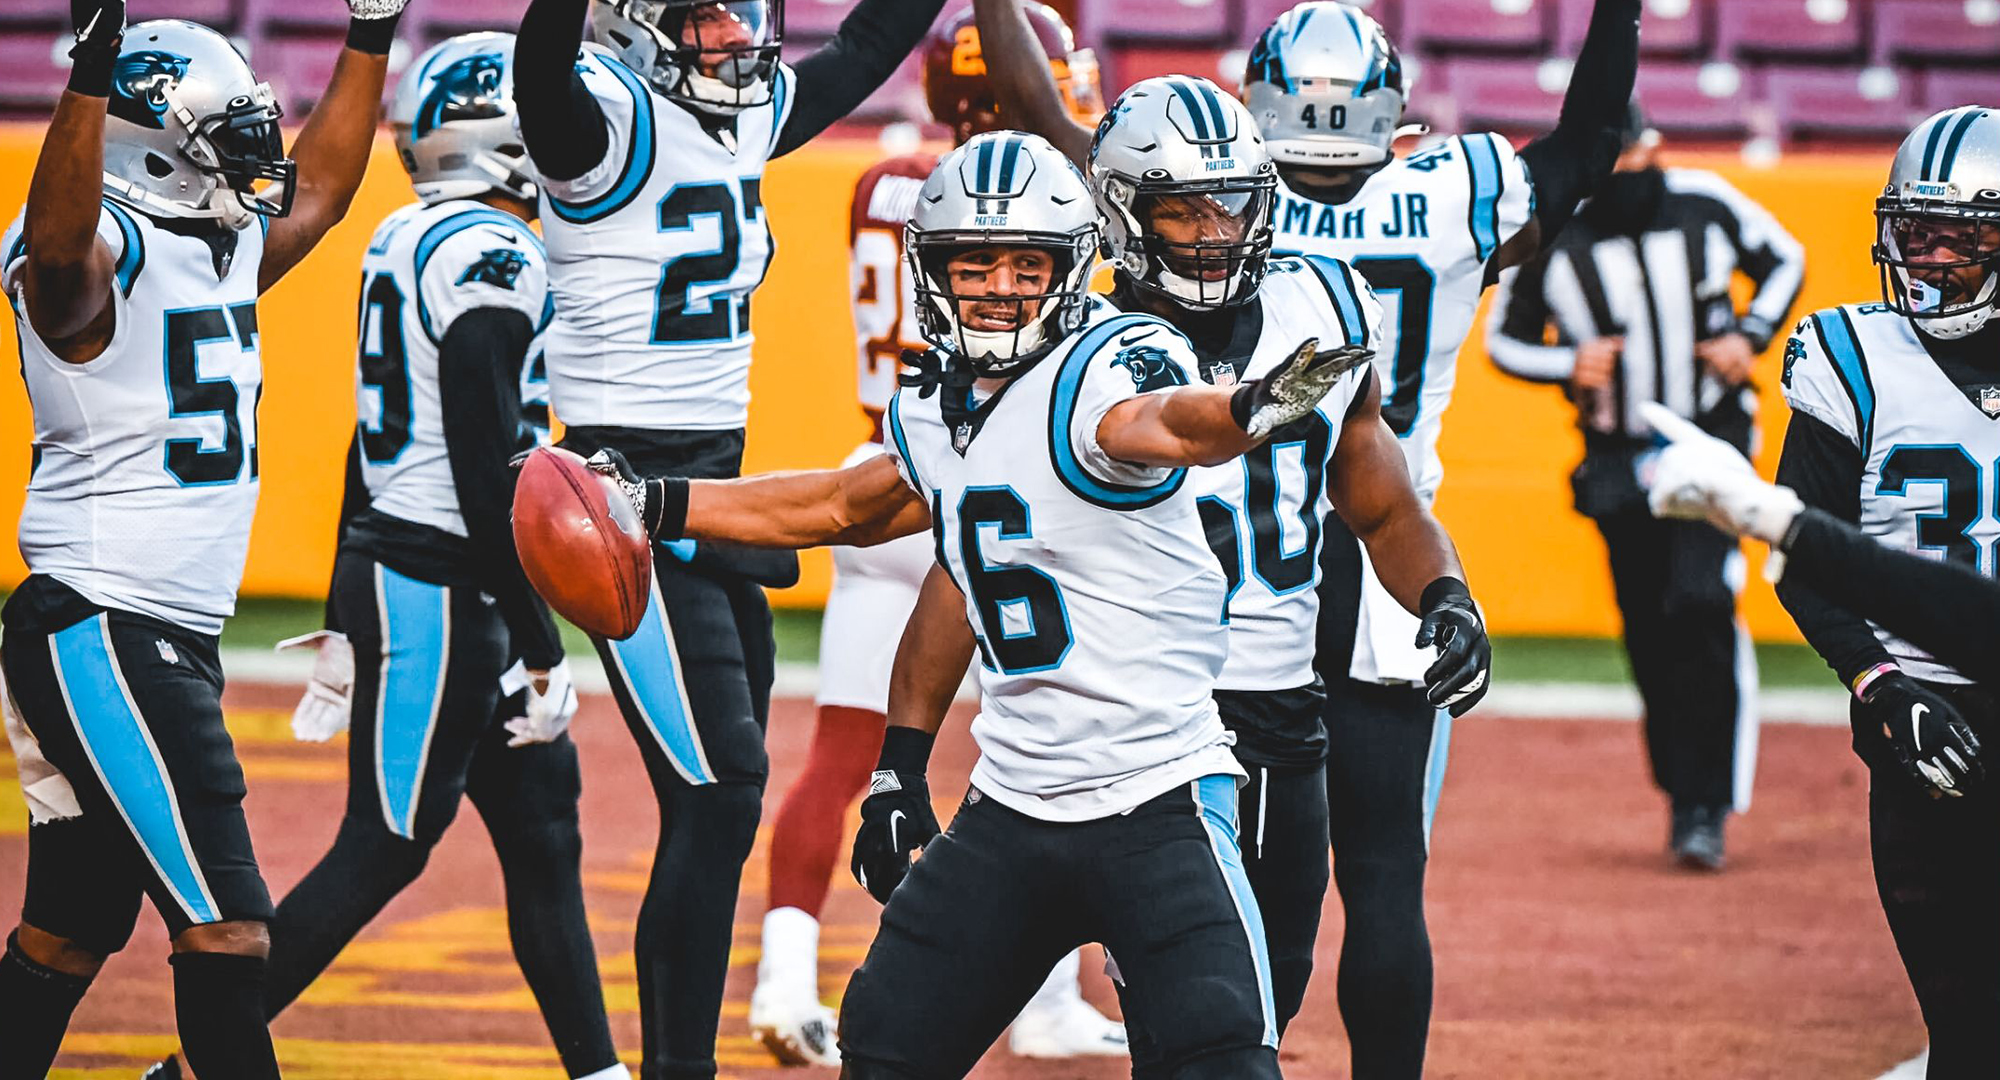 Former Cobber Brandon Zylstra gets ready to spike the ball after his first career touchdown. (Photo courtesy of the Carolina Panthers).